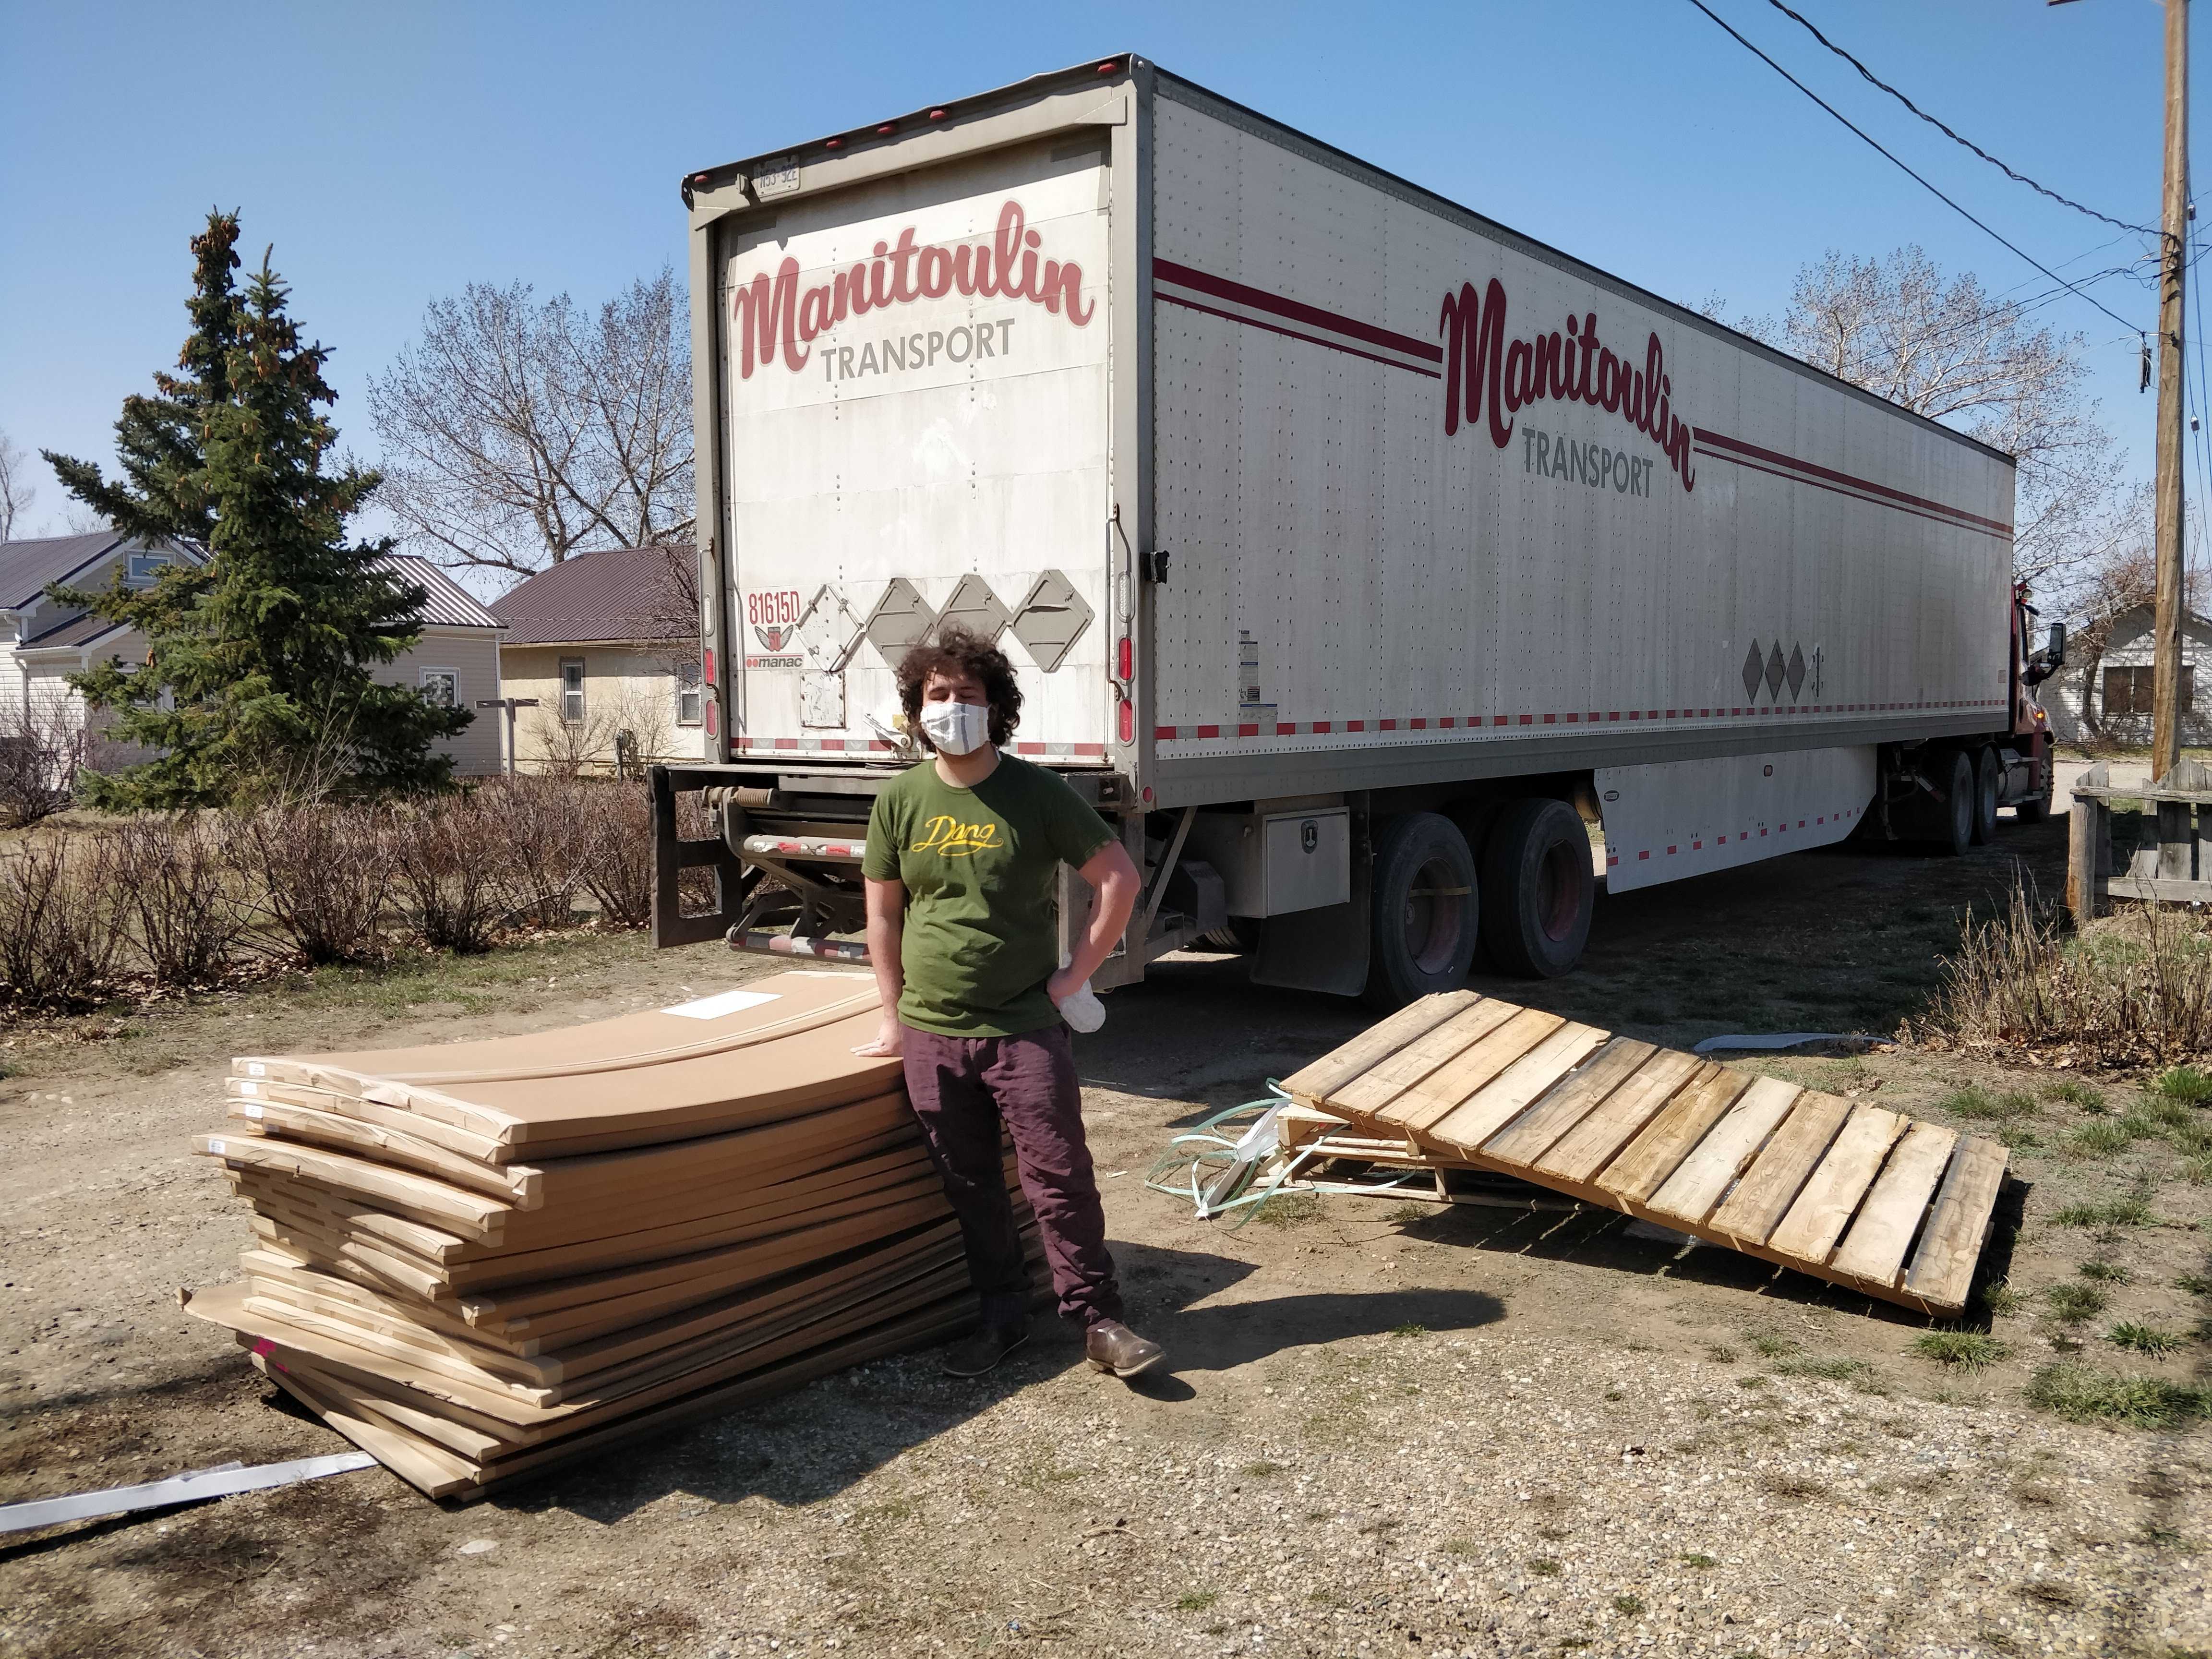 A man standing next to a truckload of maps.